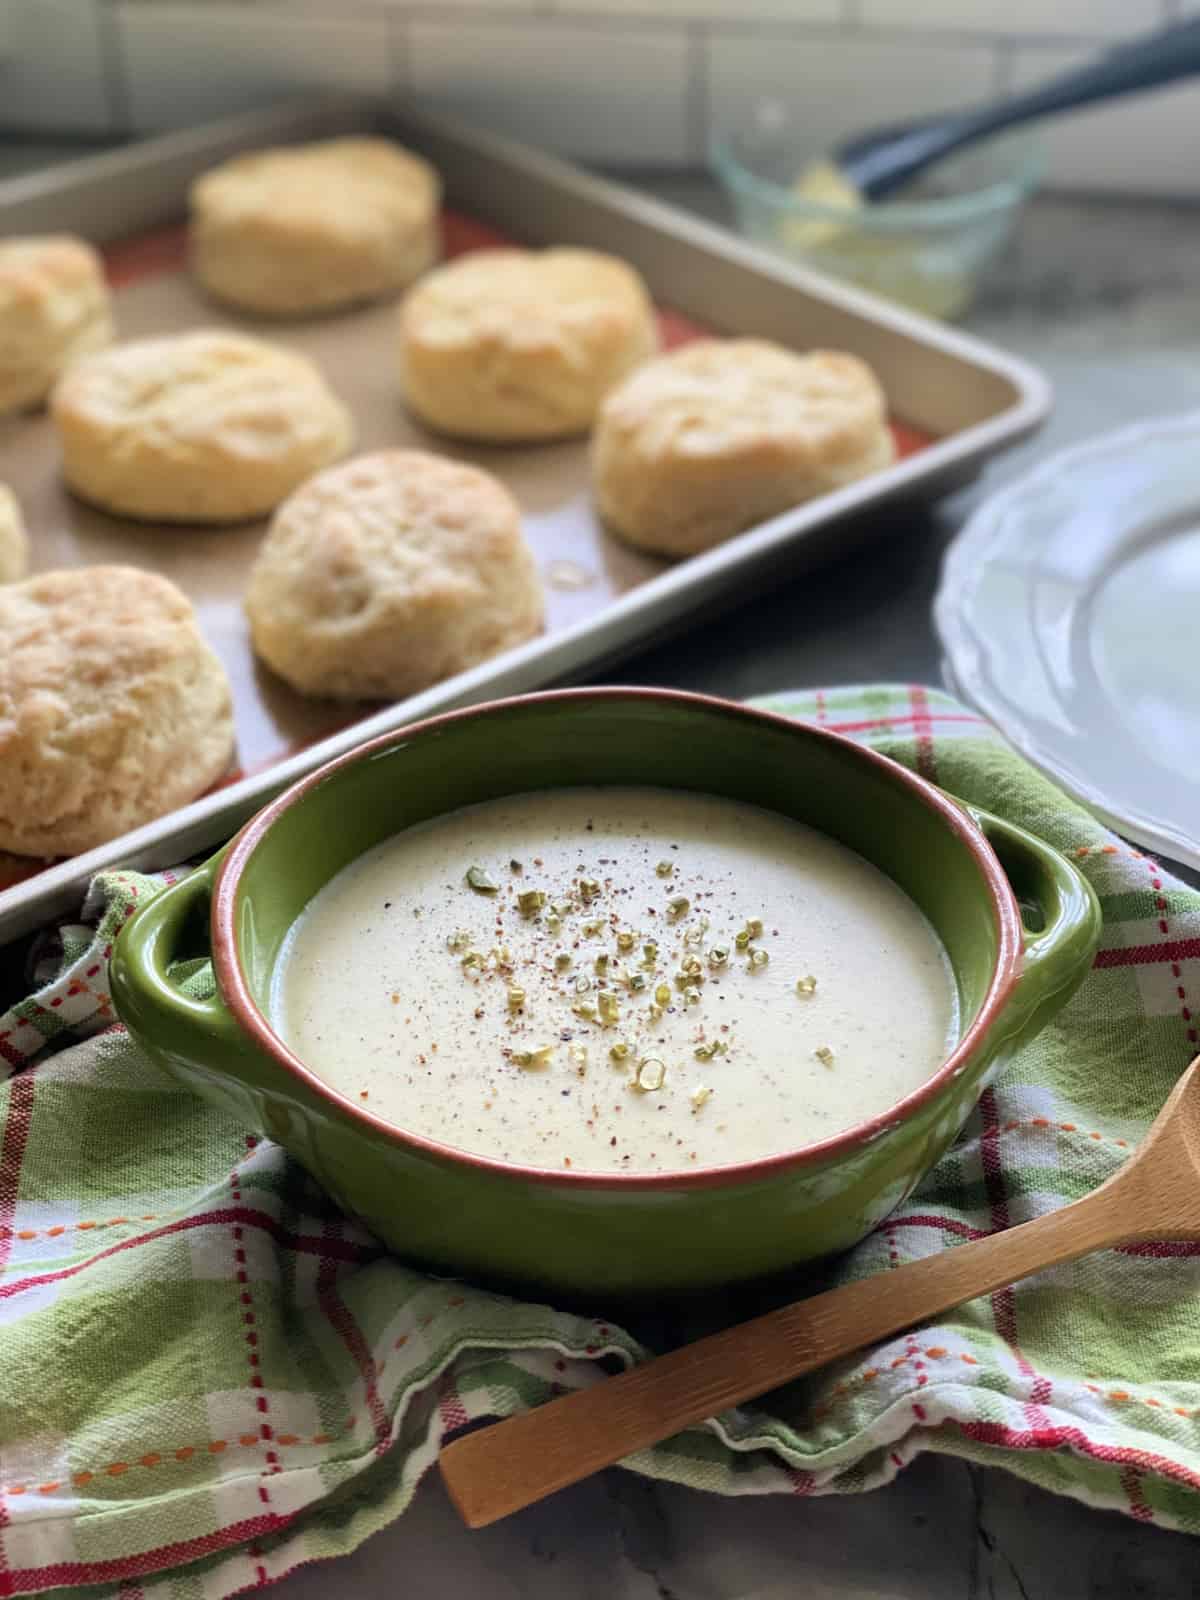 Green bowl filled with white gravy and a tray of biscuits next to the gravy bowl.